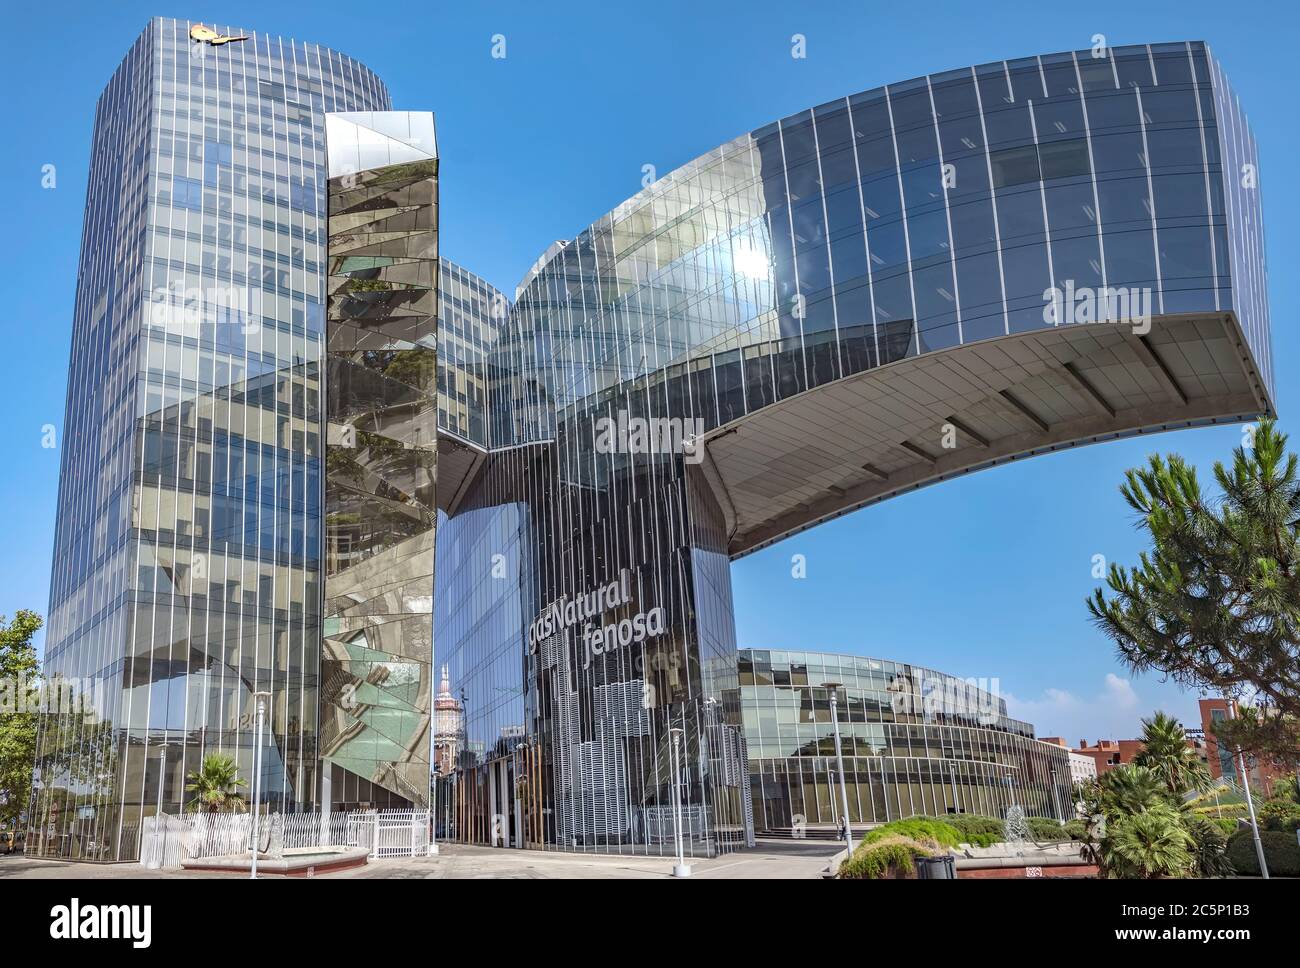 BARCELONA, SPAIN - JULY 4, 2016: Office building of Gas Natural fenosa is a  Spanish natural gas utilities company. The firm is headquartered located i  Stock Photo - Alamy